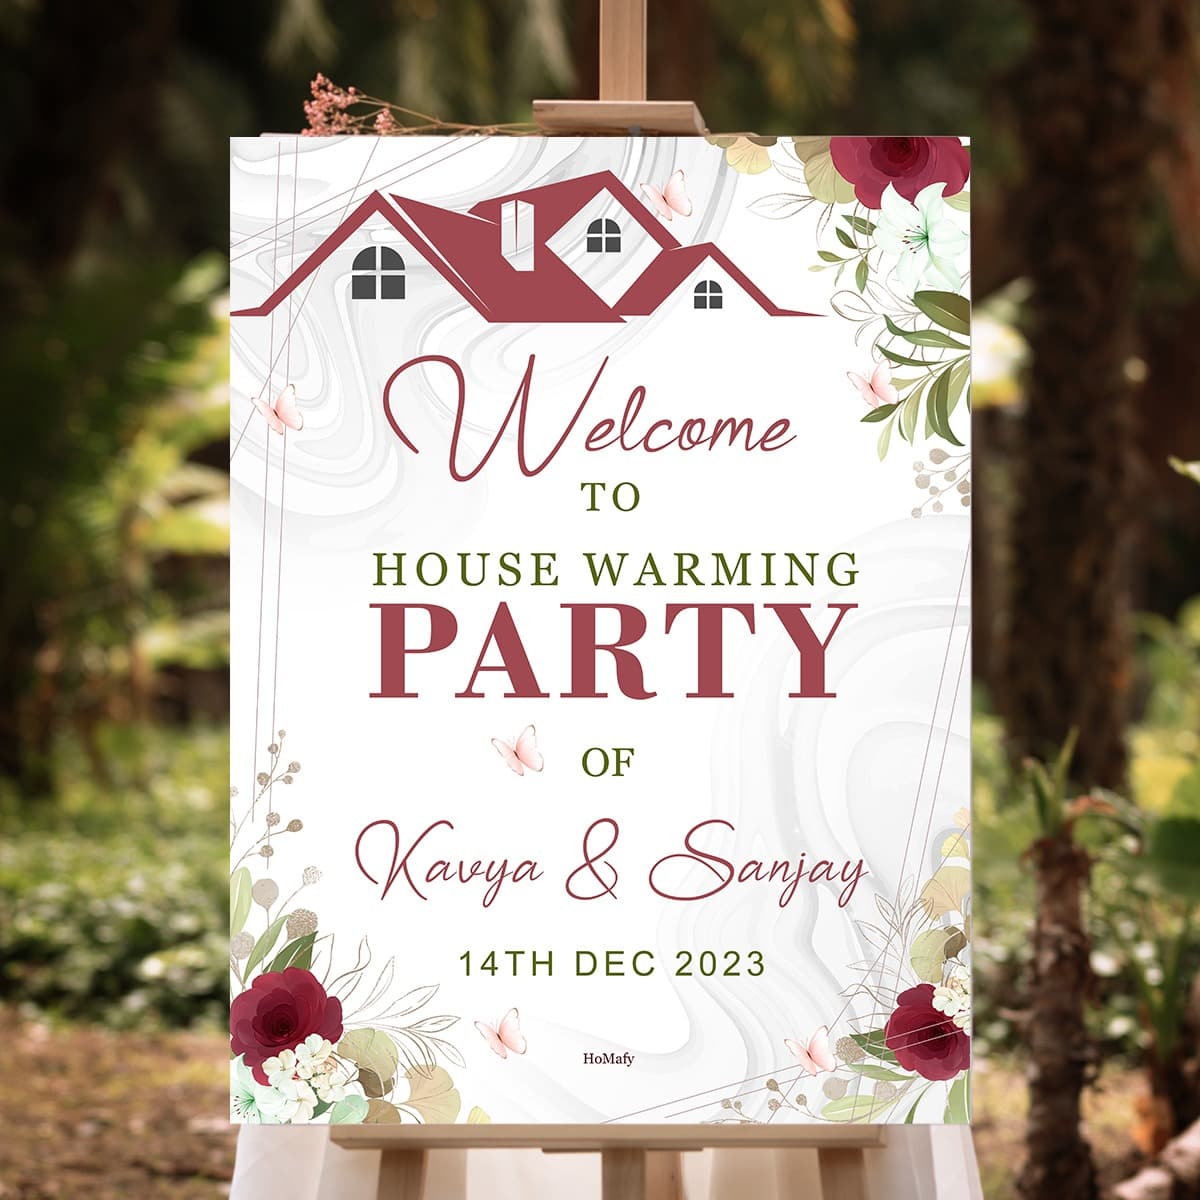 https://homafy.com/wp-content/uploads/2023/12/Personalized-Housewarming-Welcome-Board.jpg